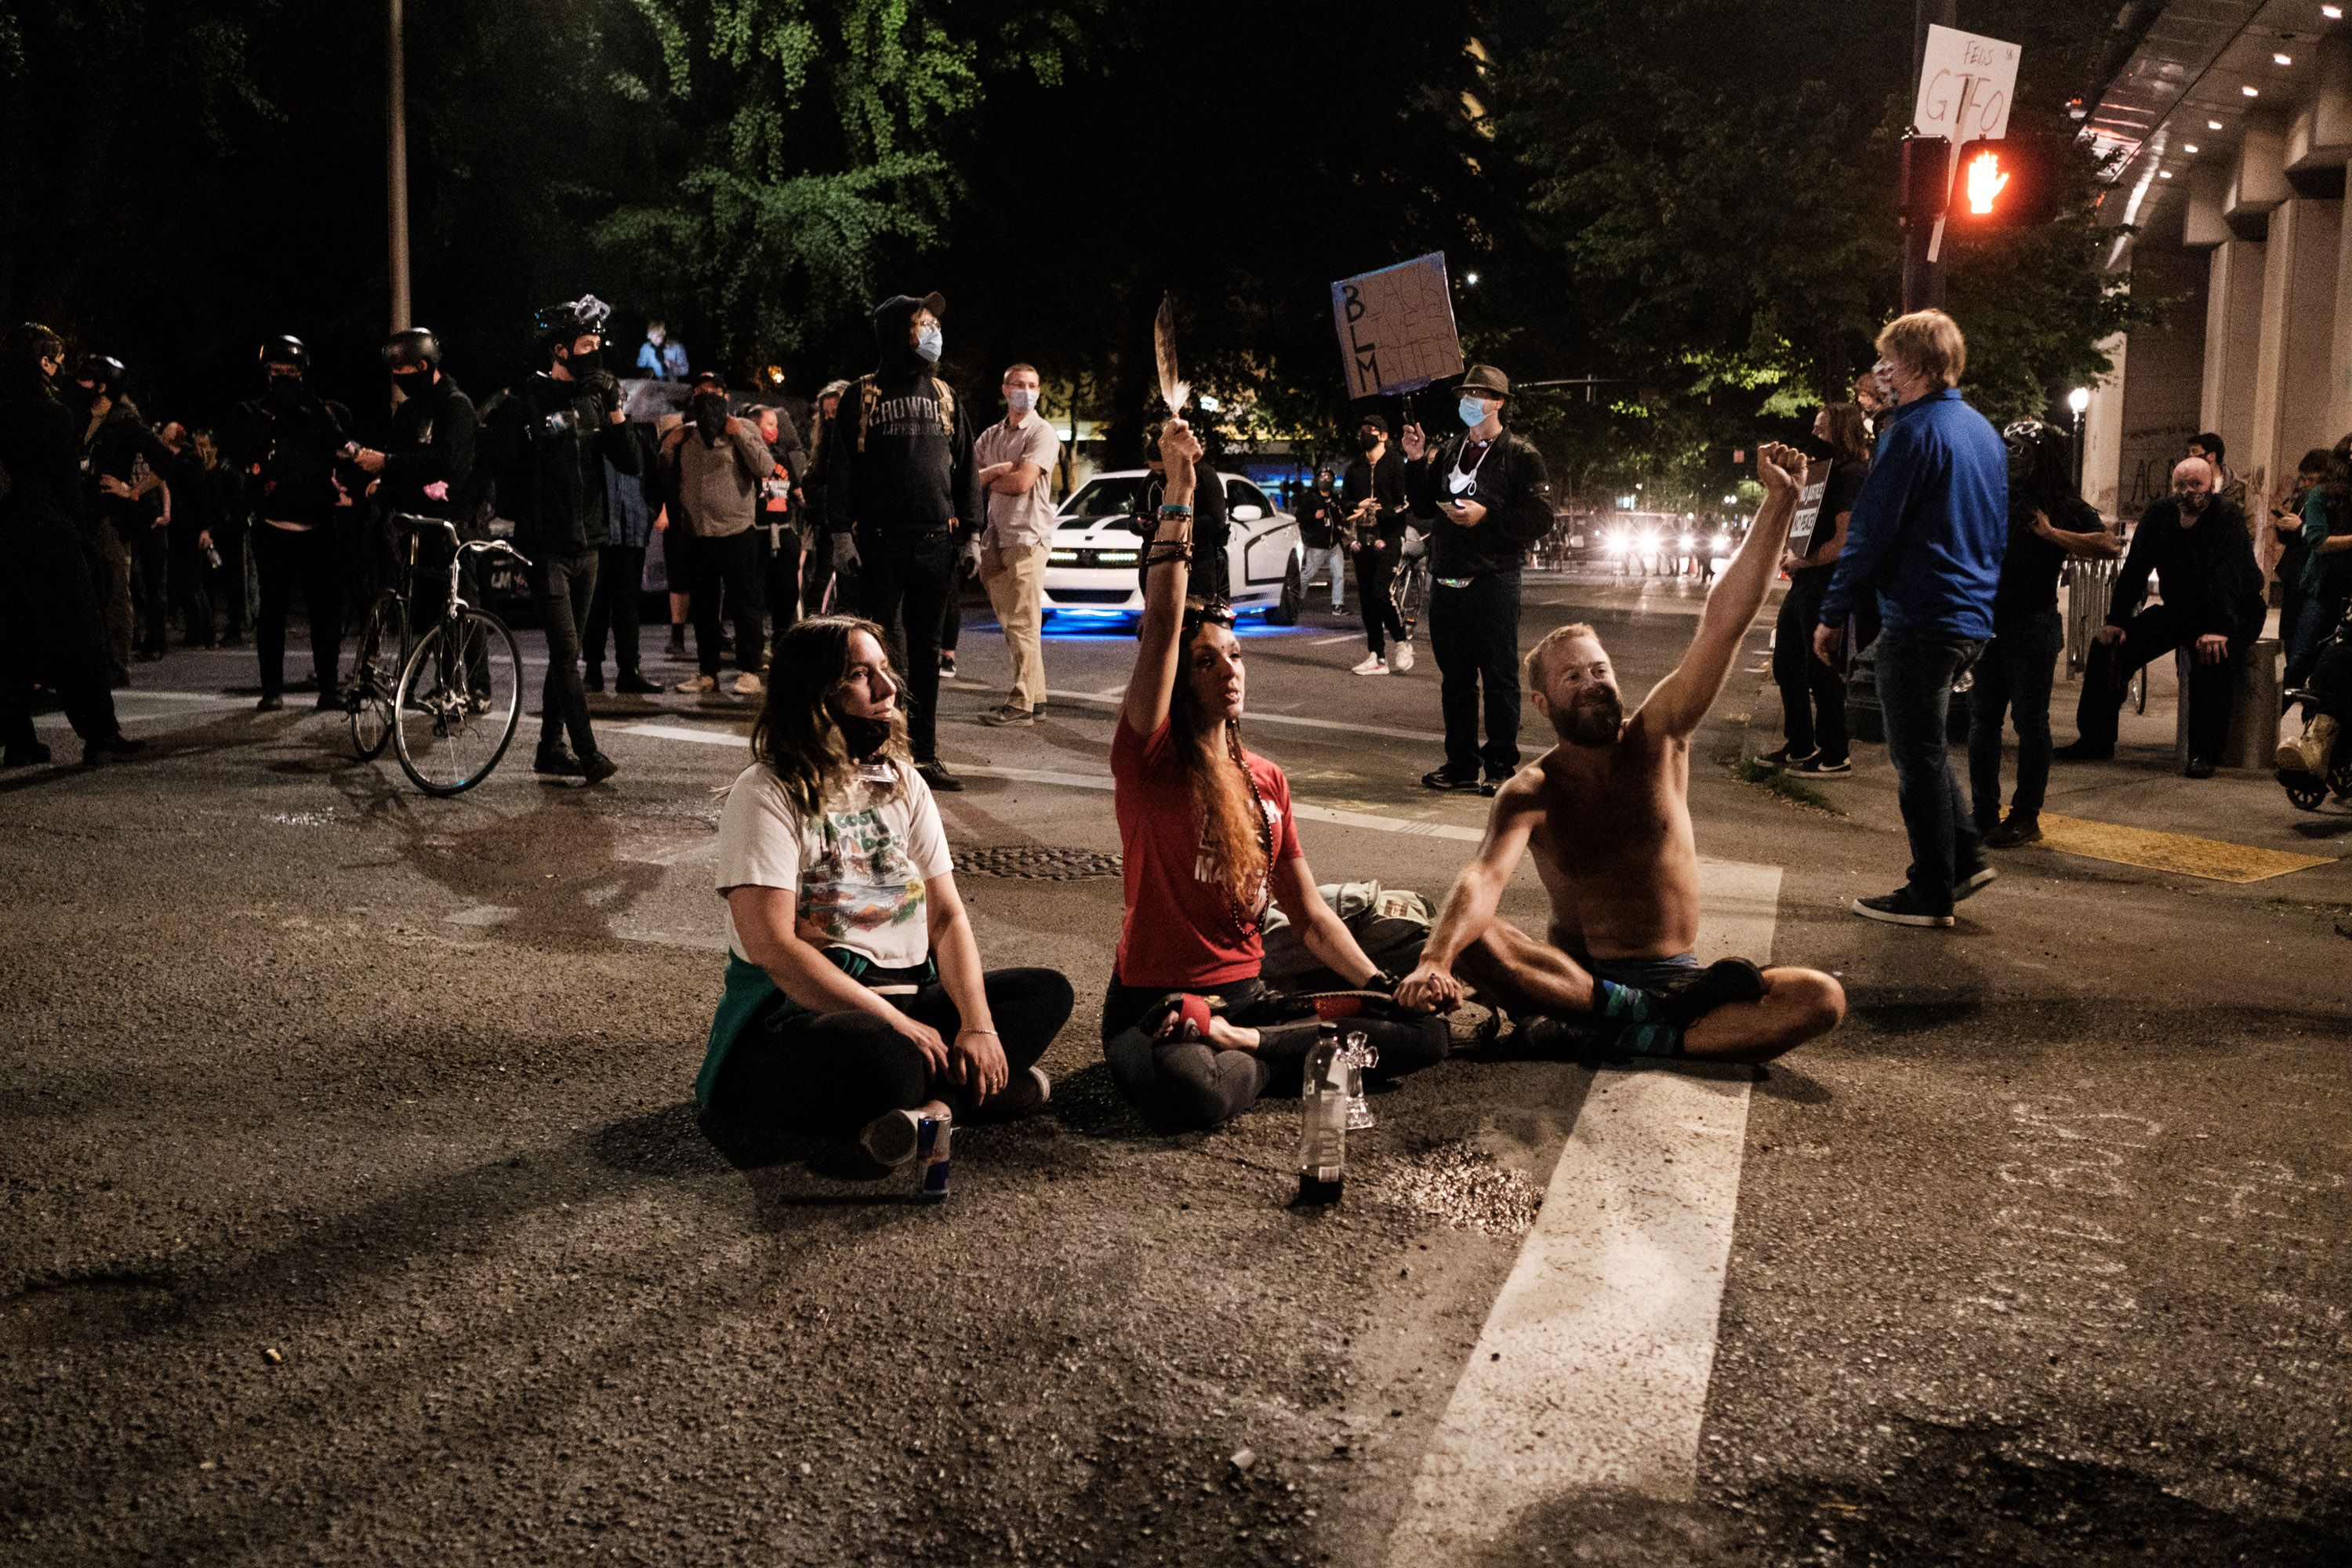 Protesters stationed outside the Multnomah County Justice Center. Photo: Mason Trinca/Getty Images